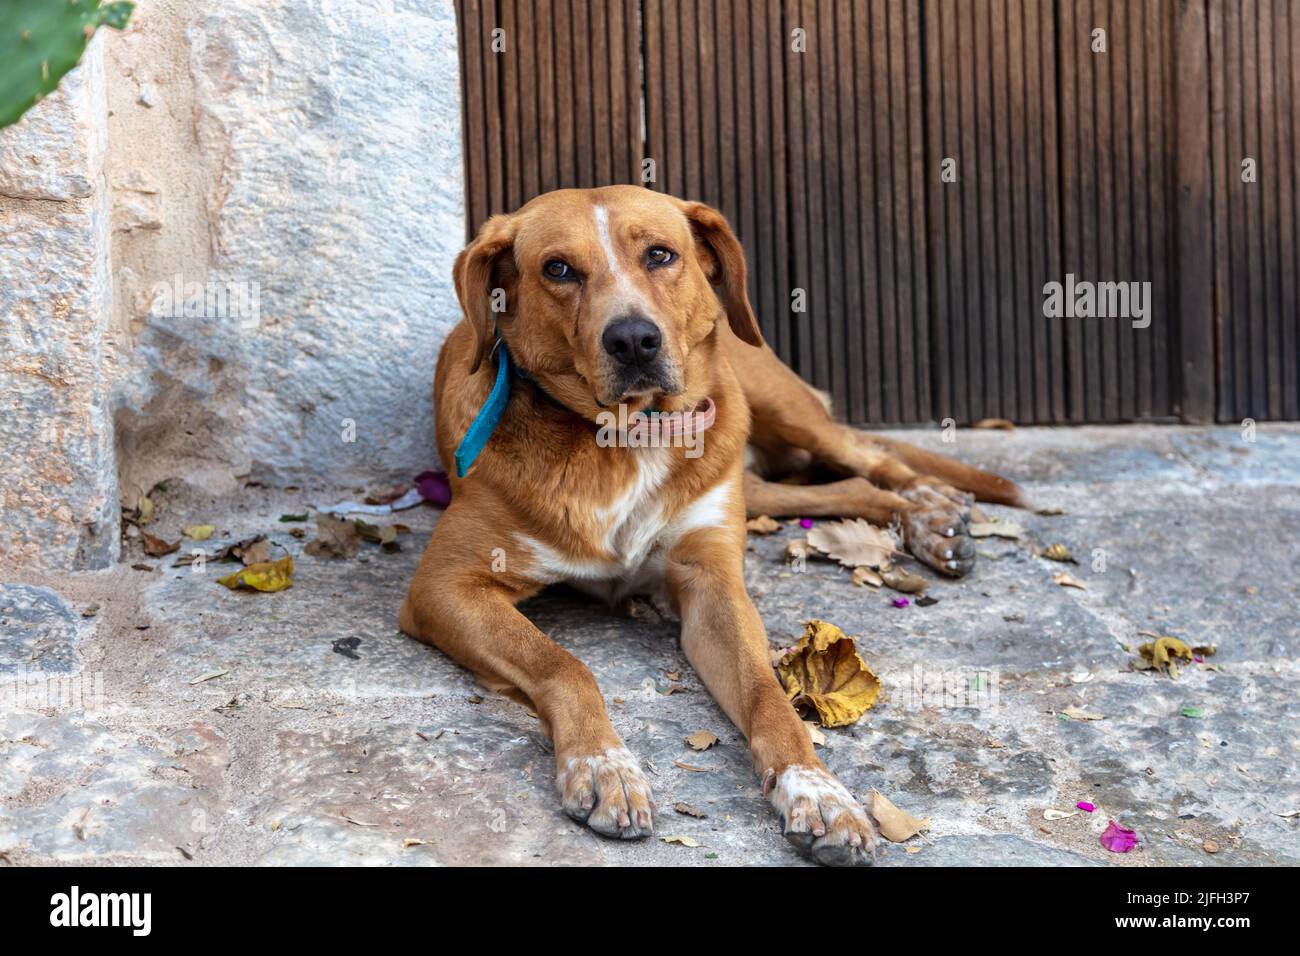 Guard dog is laying on paved street outside of house entrance. Greece, Mani Laconia, Peloponnese. Portrait of large friendly brown domestic pet. Secur Stock Photo